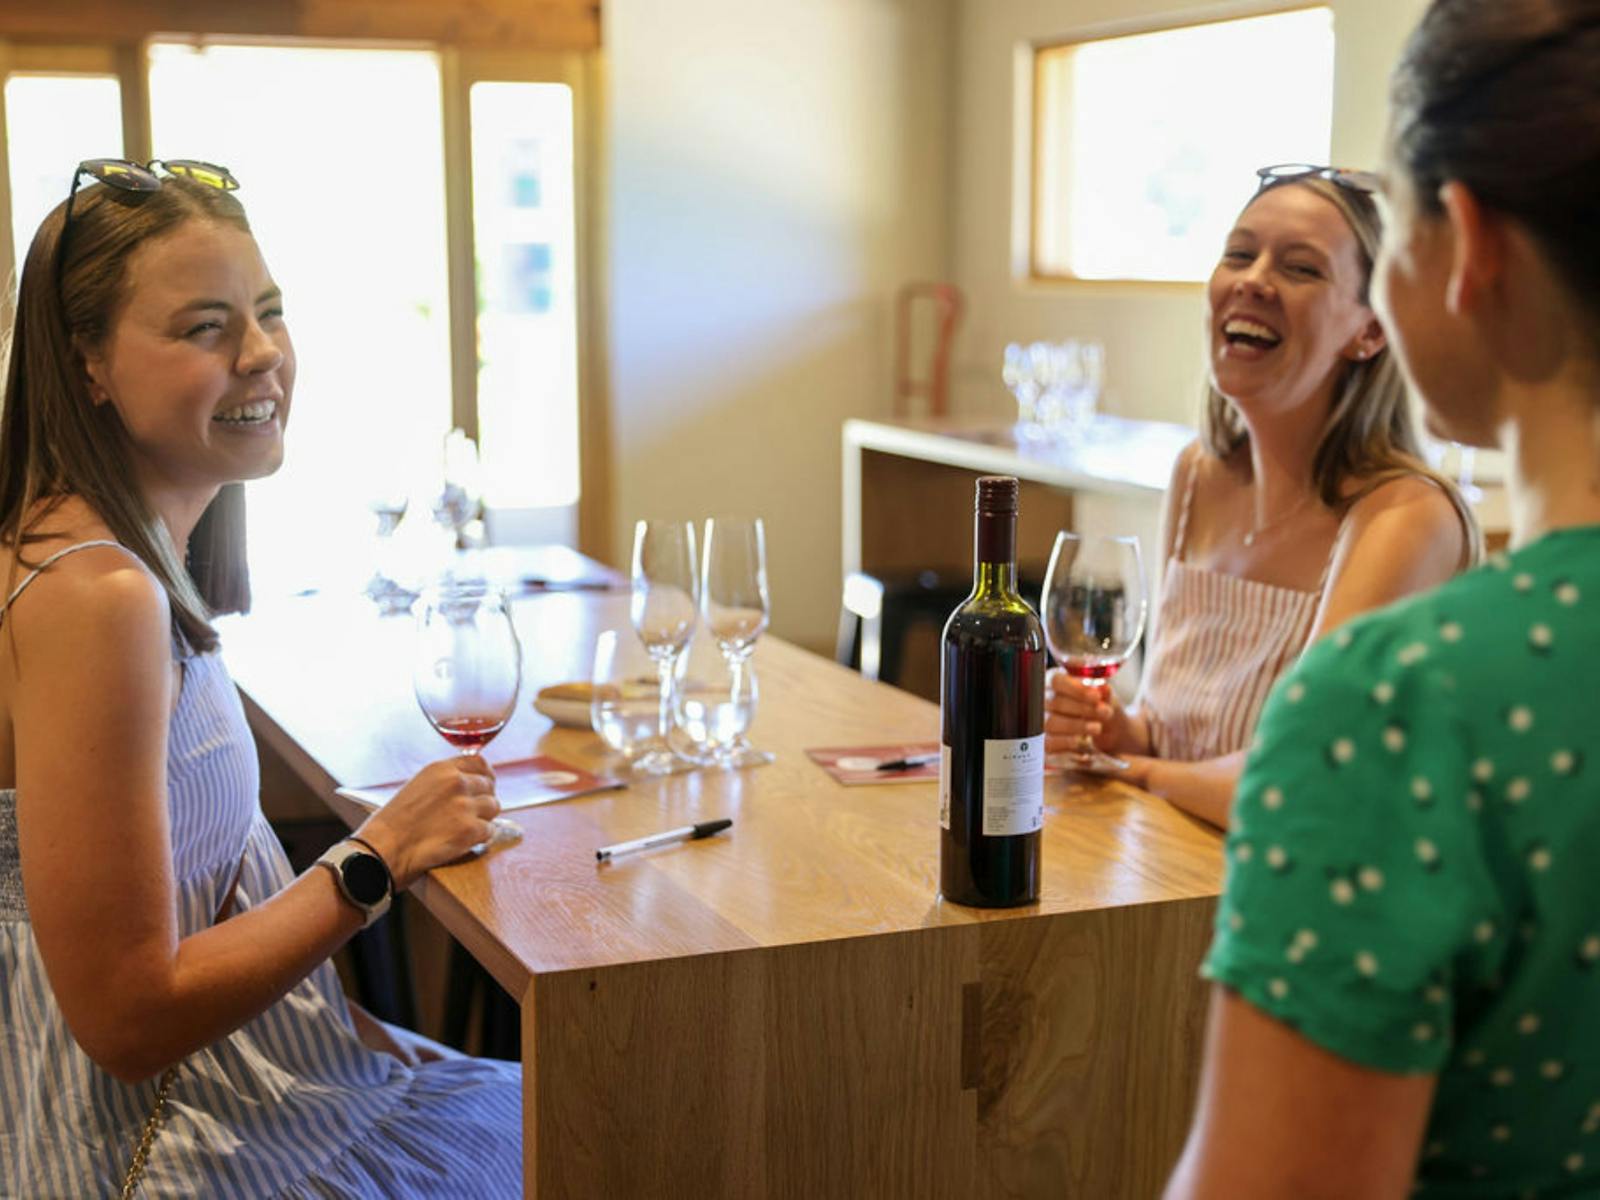 Learn all about Ringer Reef wines in a relaxed tasting